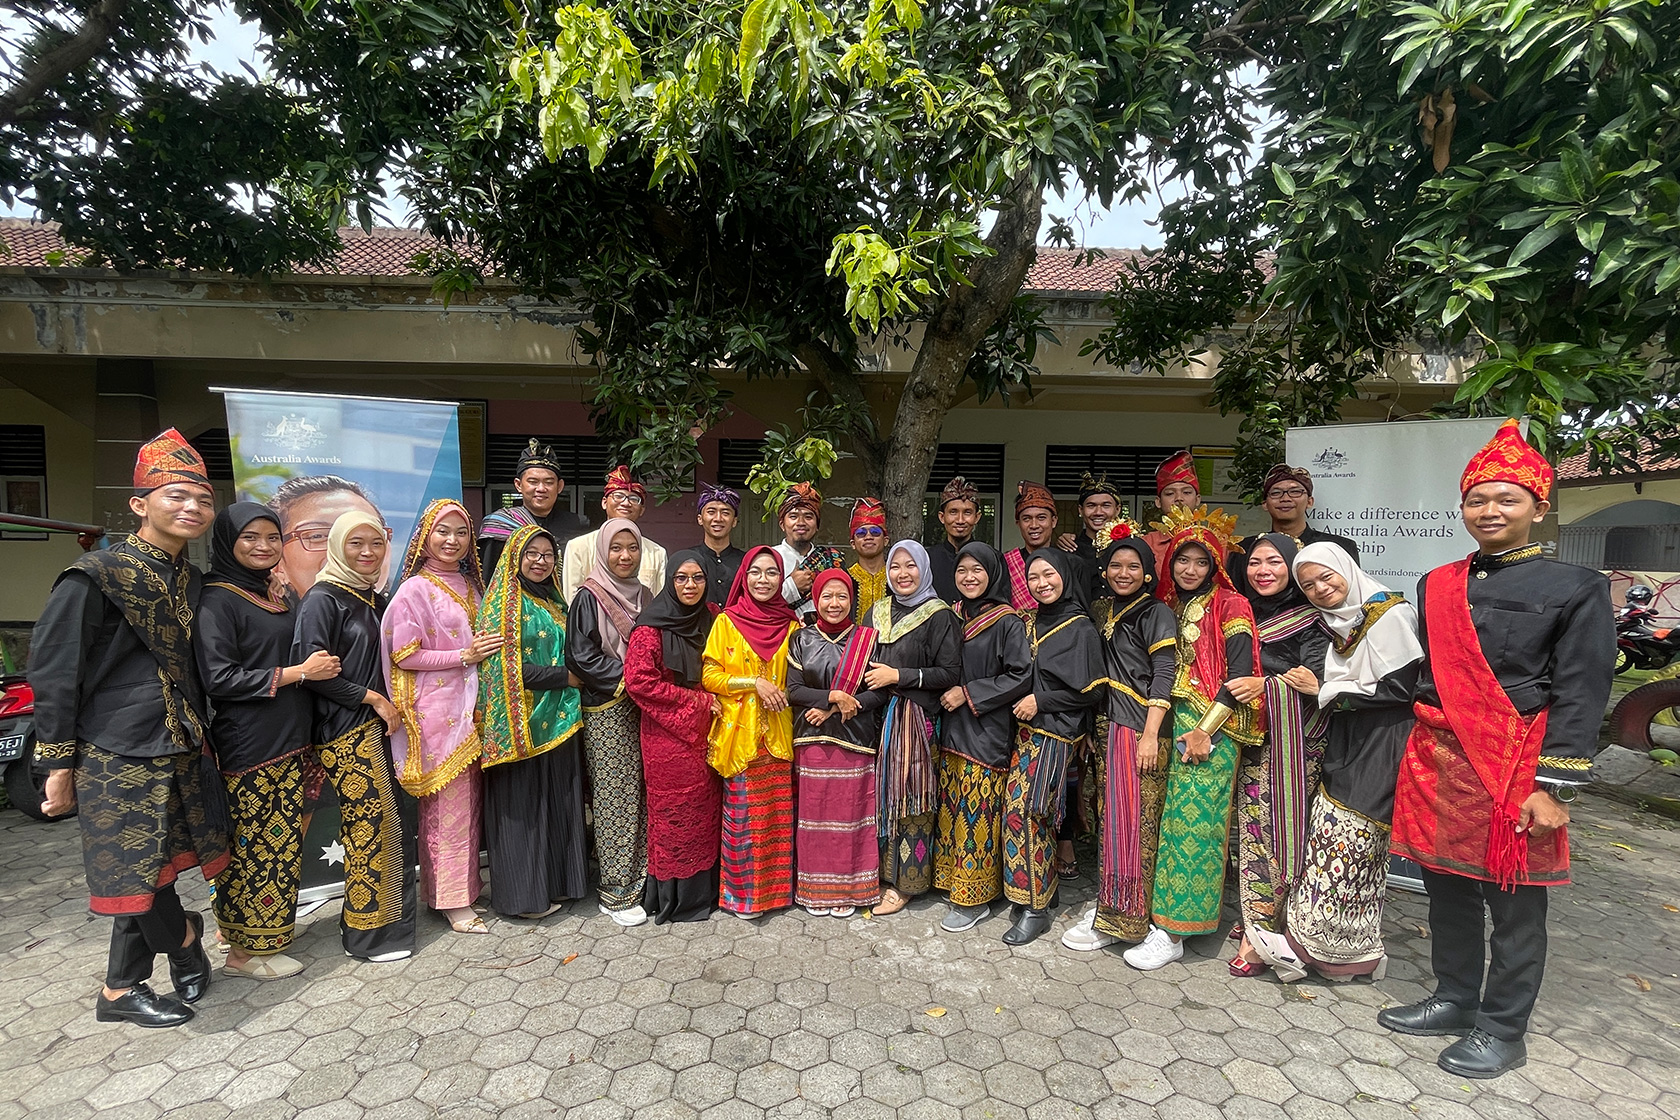 Wrapping up the ELTA program in Mataram, participants dress in traditional local costumes for a group photo.